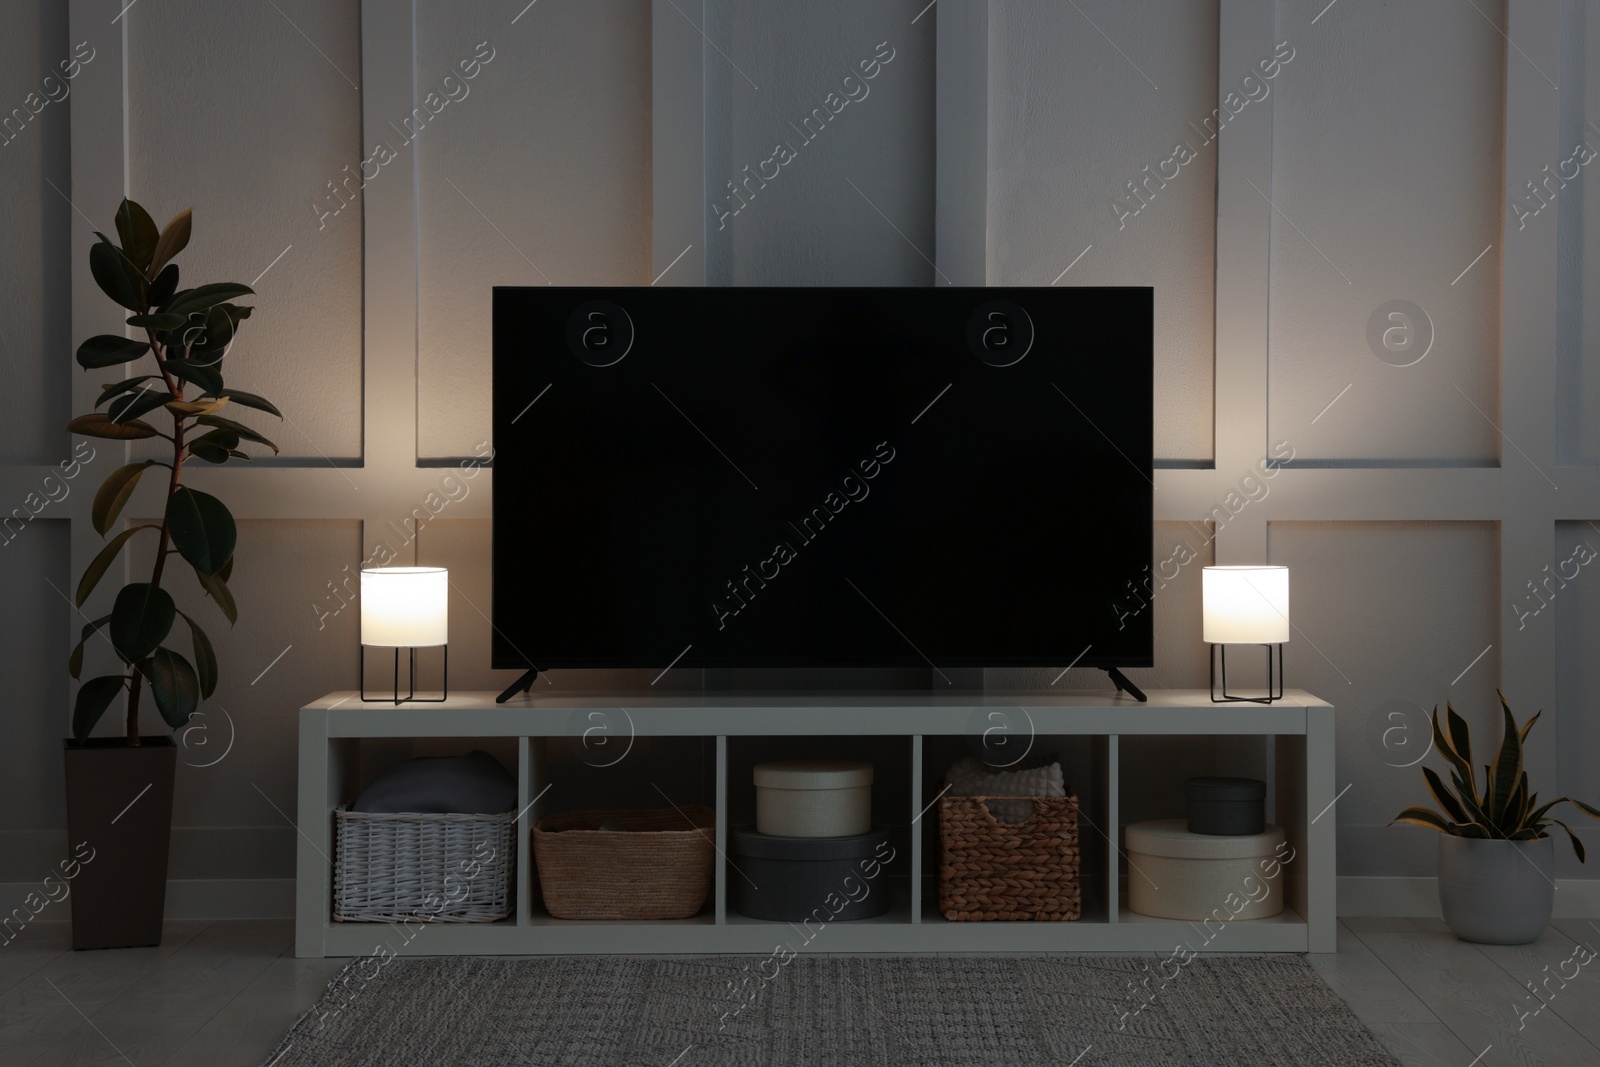 Photo of Modern TV on cabinet, lamps and beautiful houseplants near white wall in room. Interior design